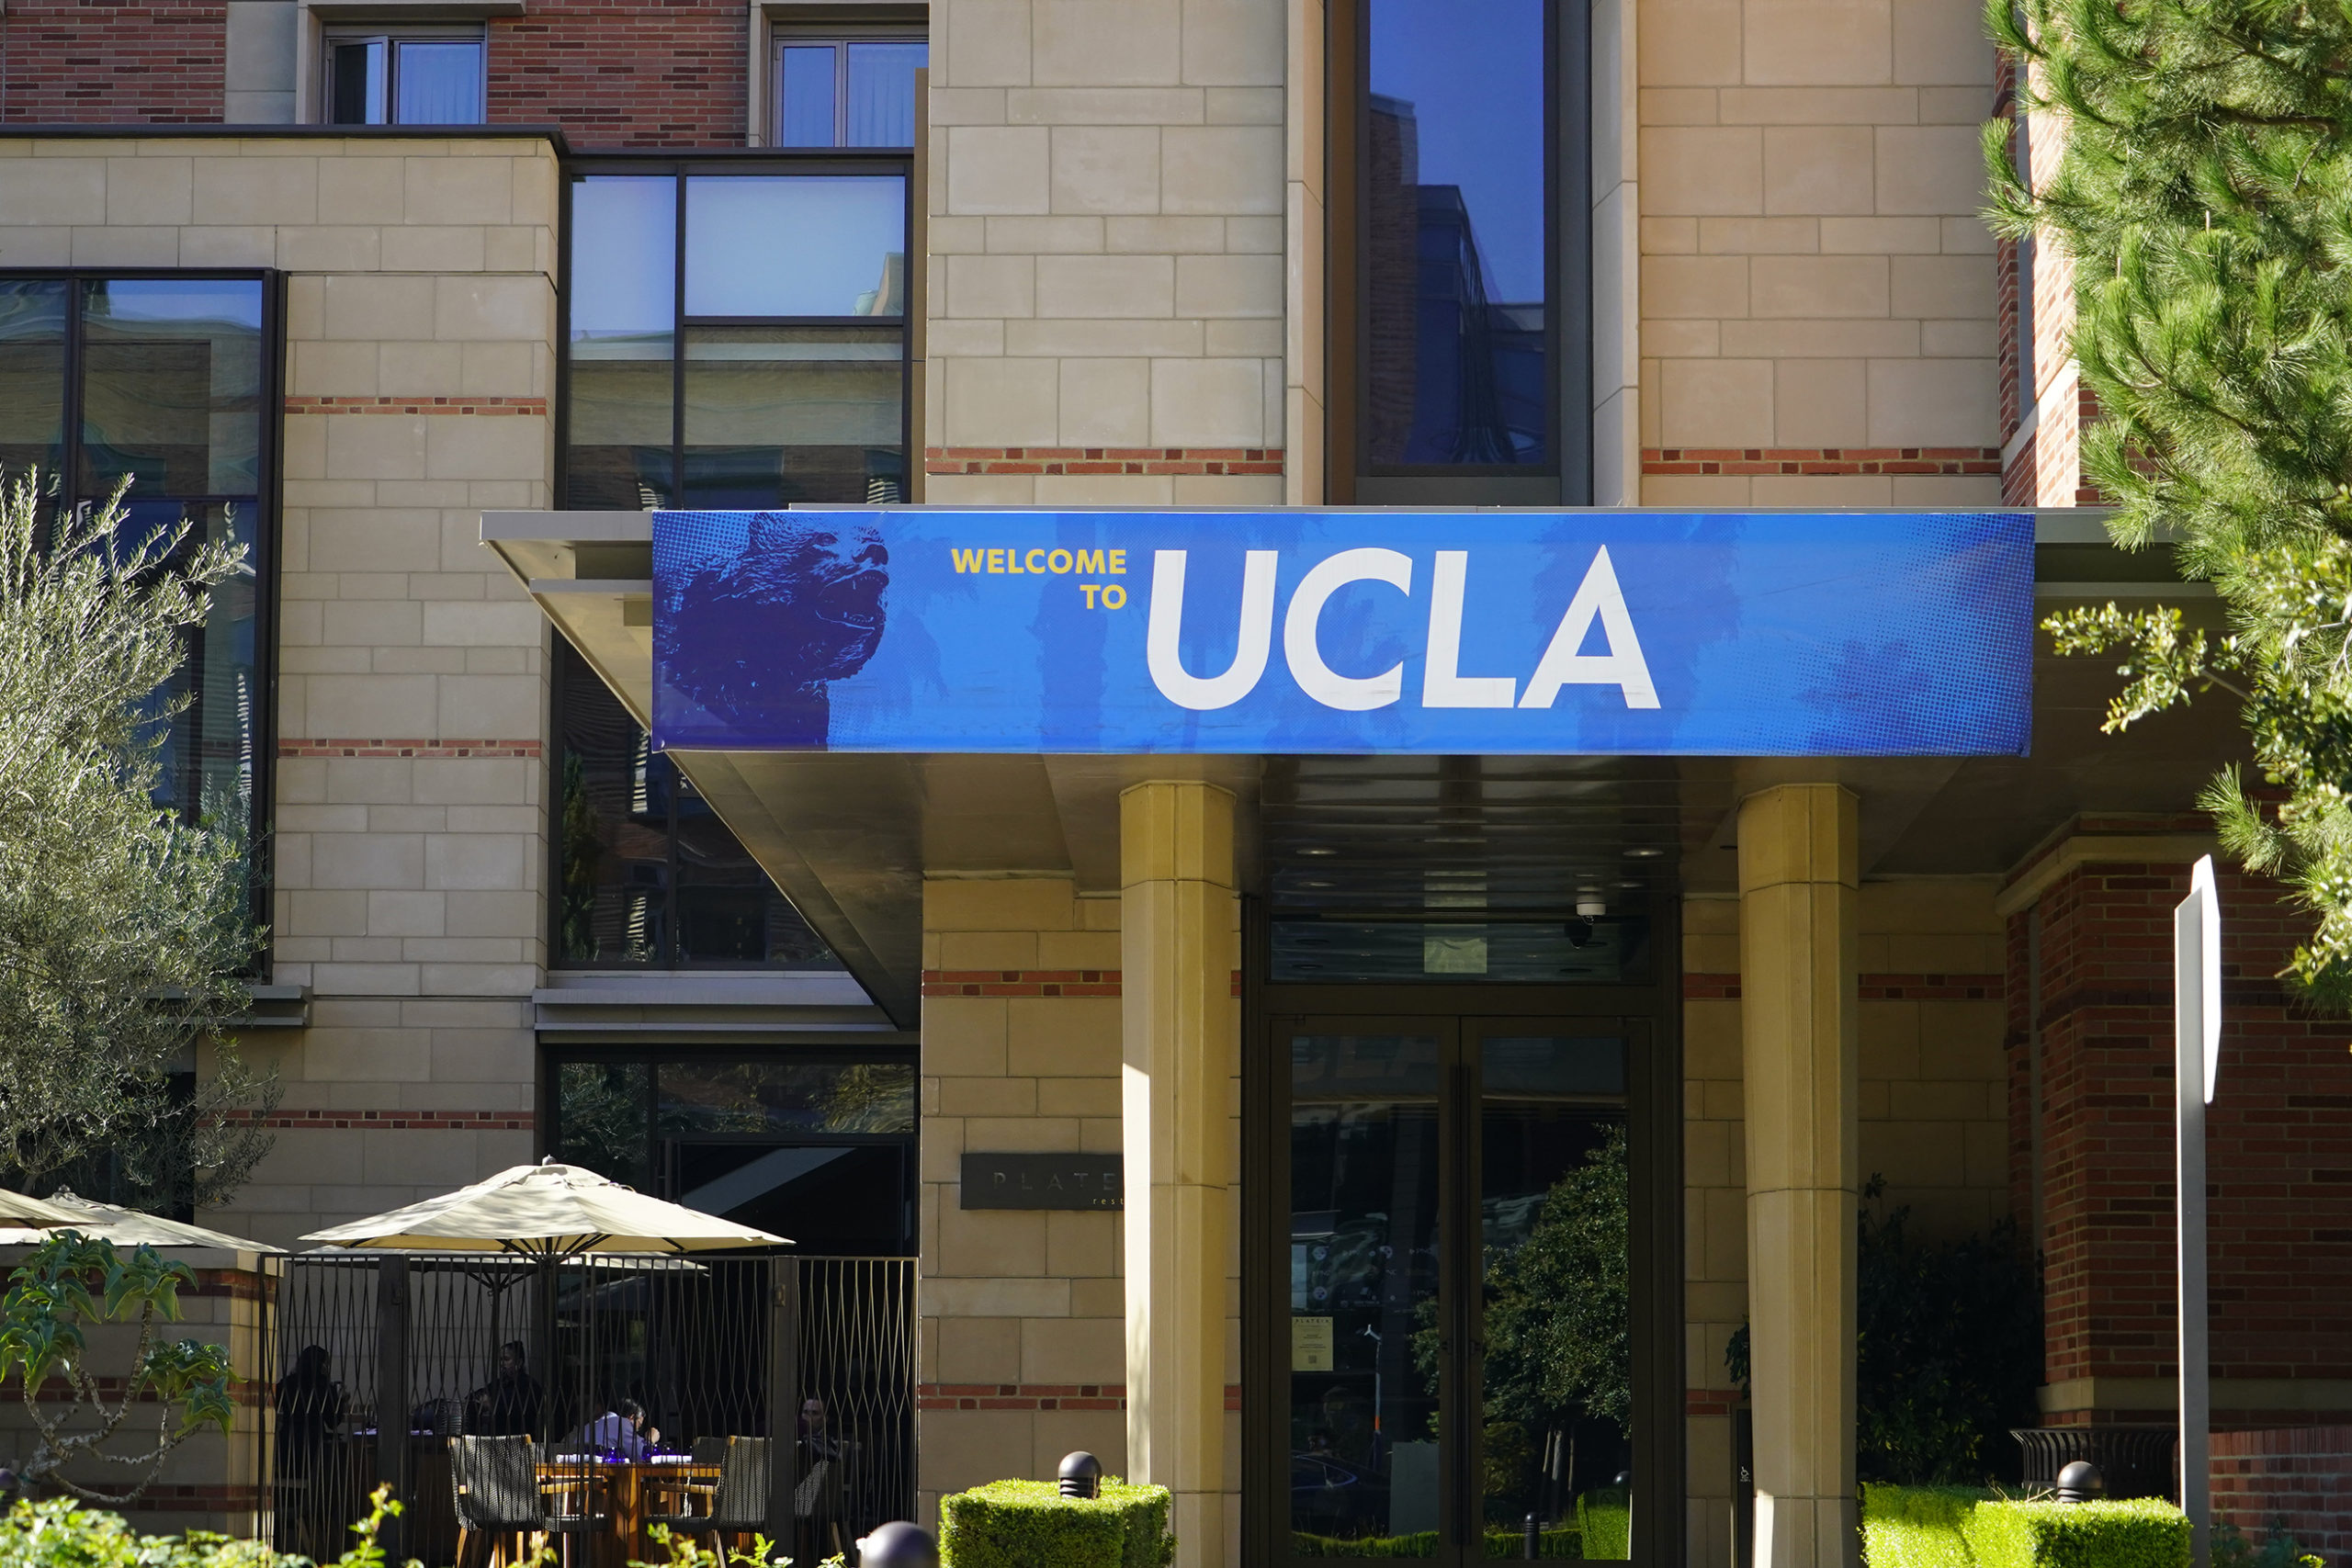 will-ucla-faculty-senate-censure-chancellor-over-handling-of-pro-palestinian-encampment?